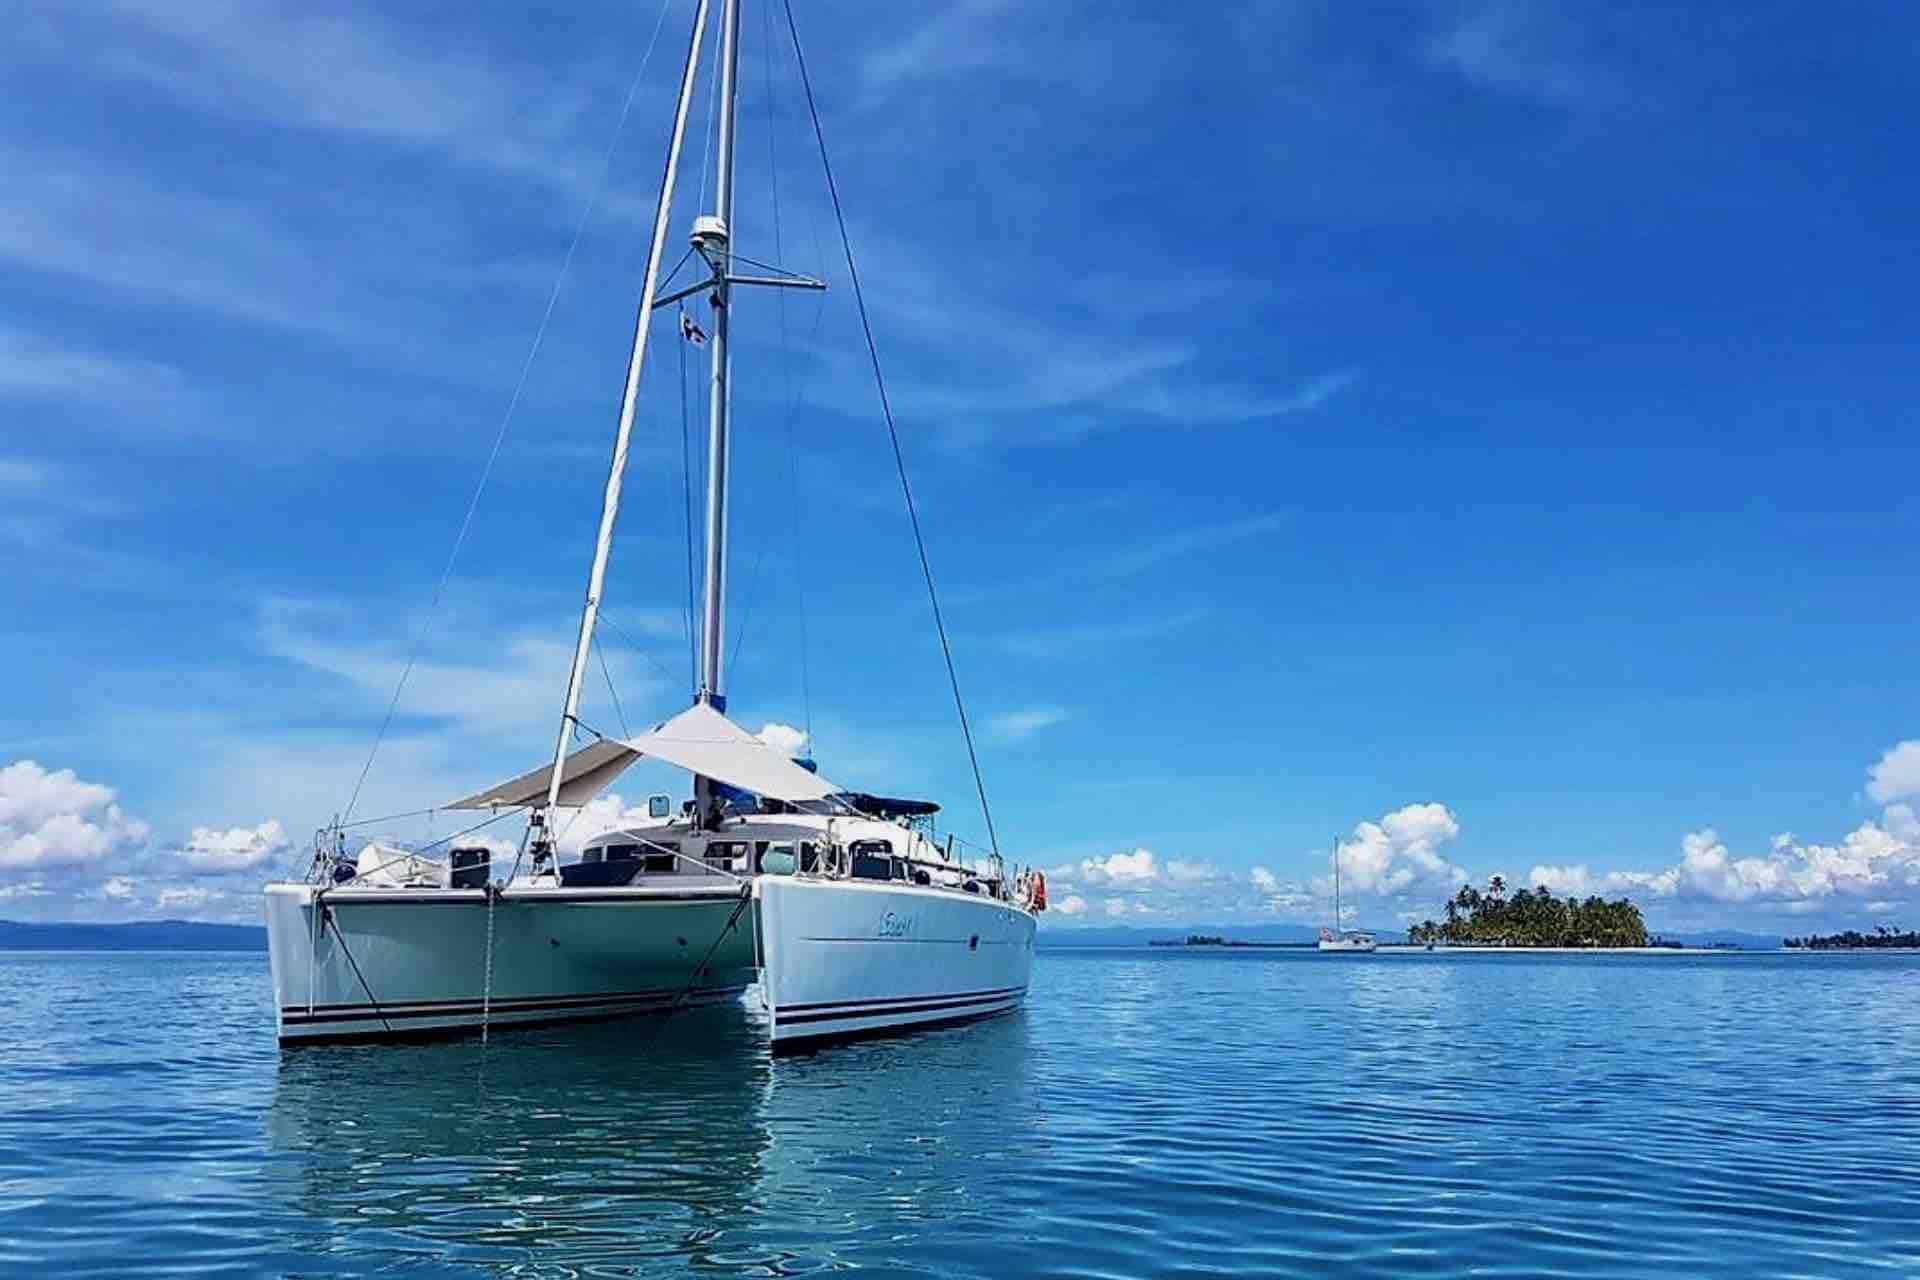 L'Eclectik II sailing life experience anchored in San Blas